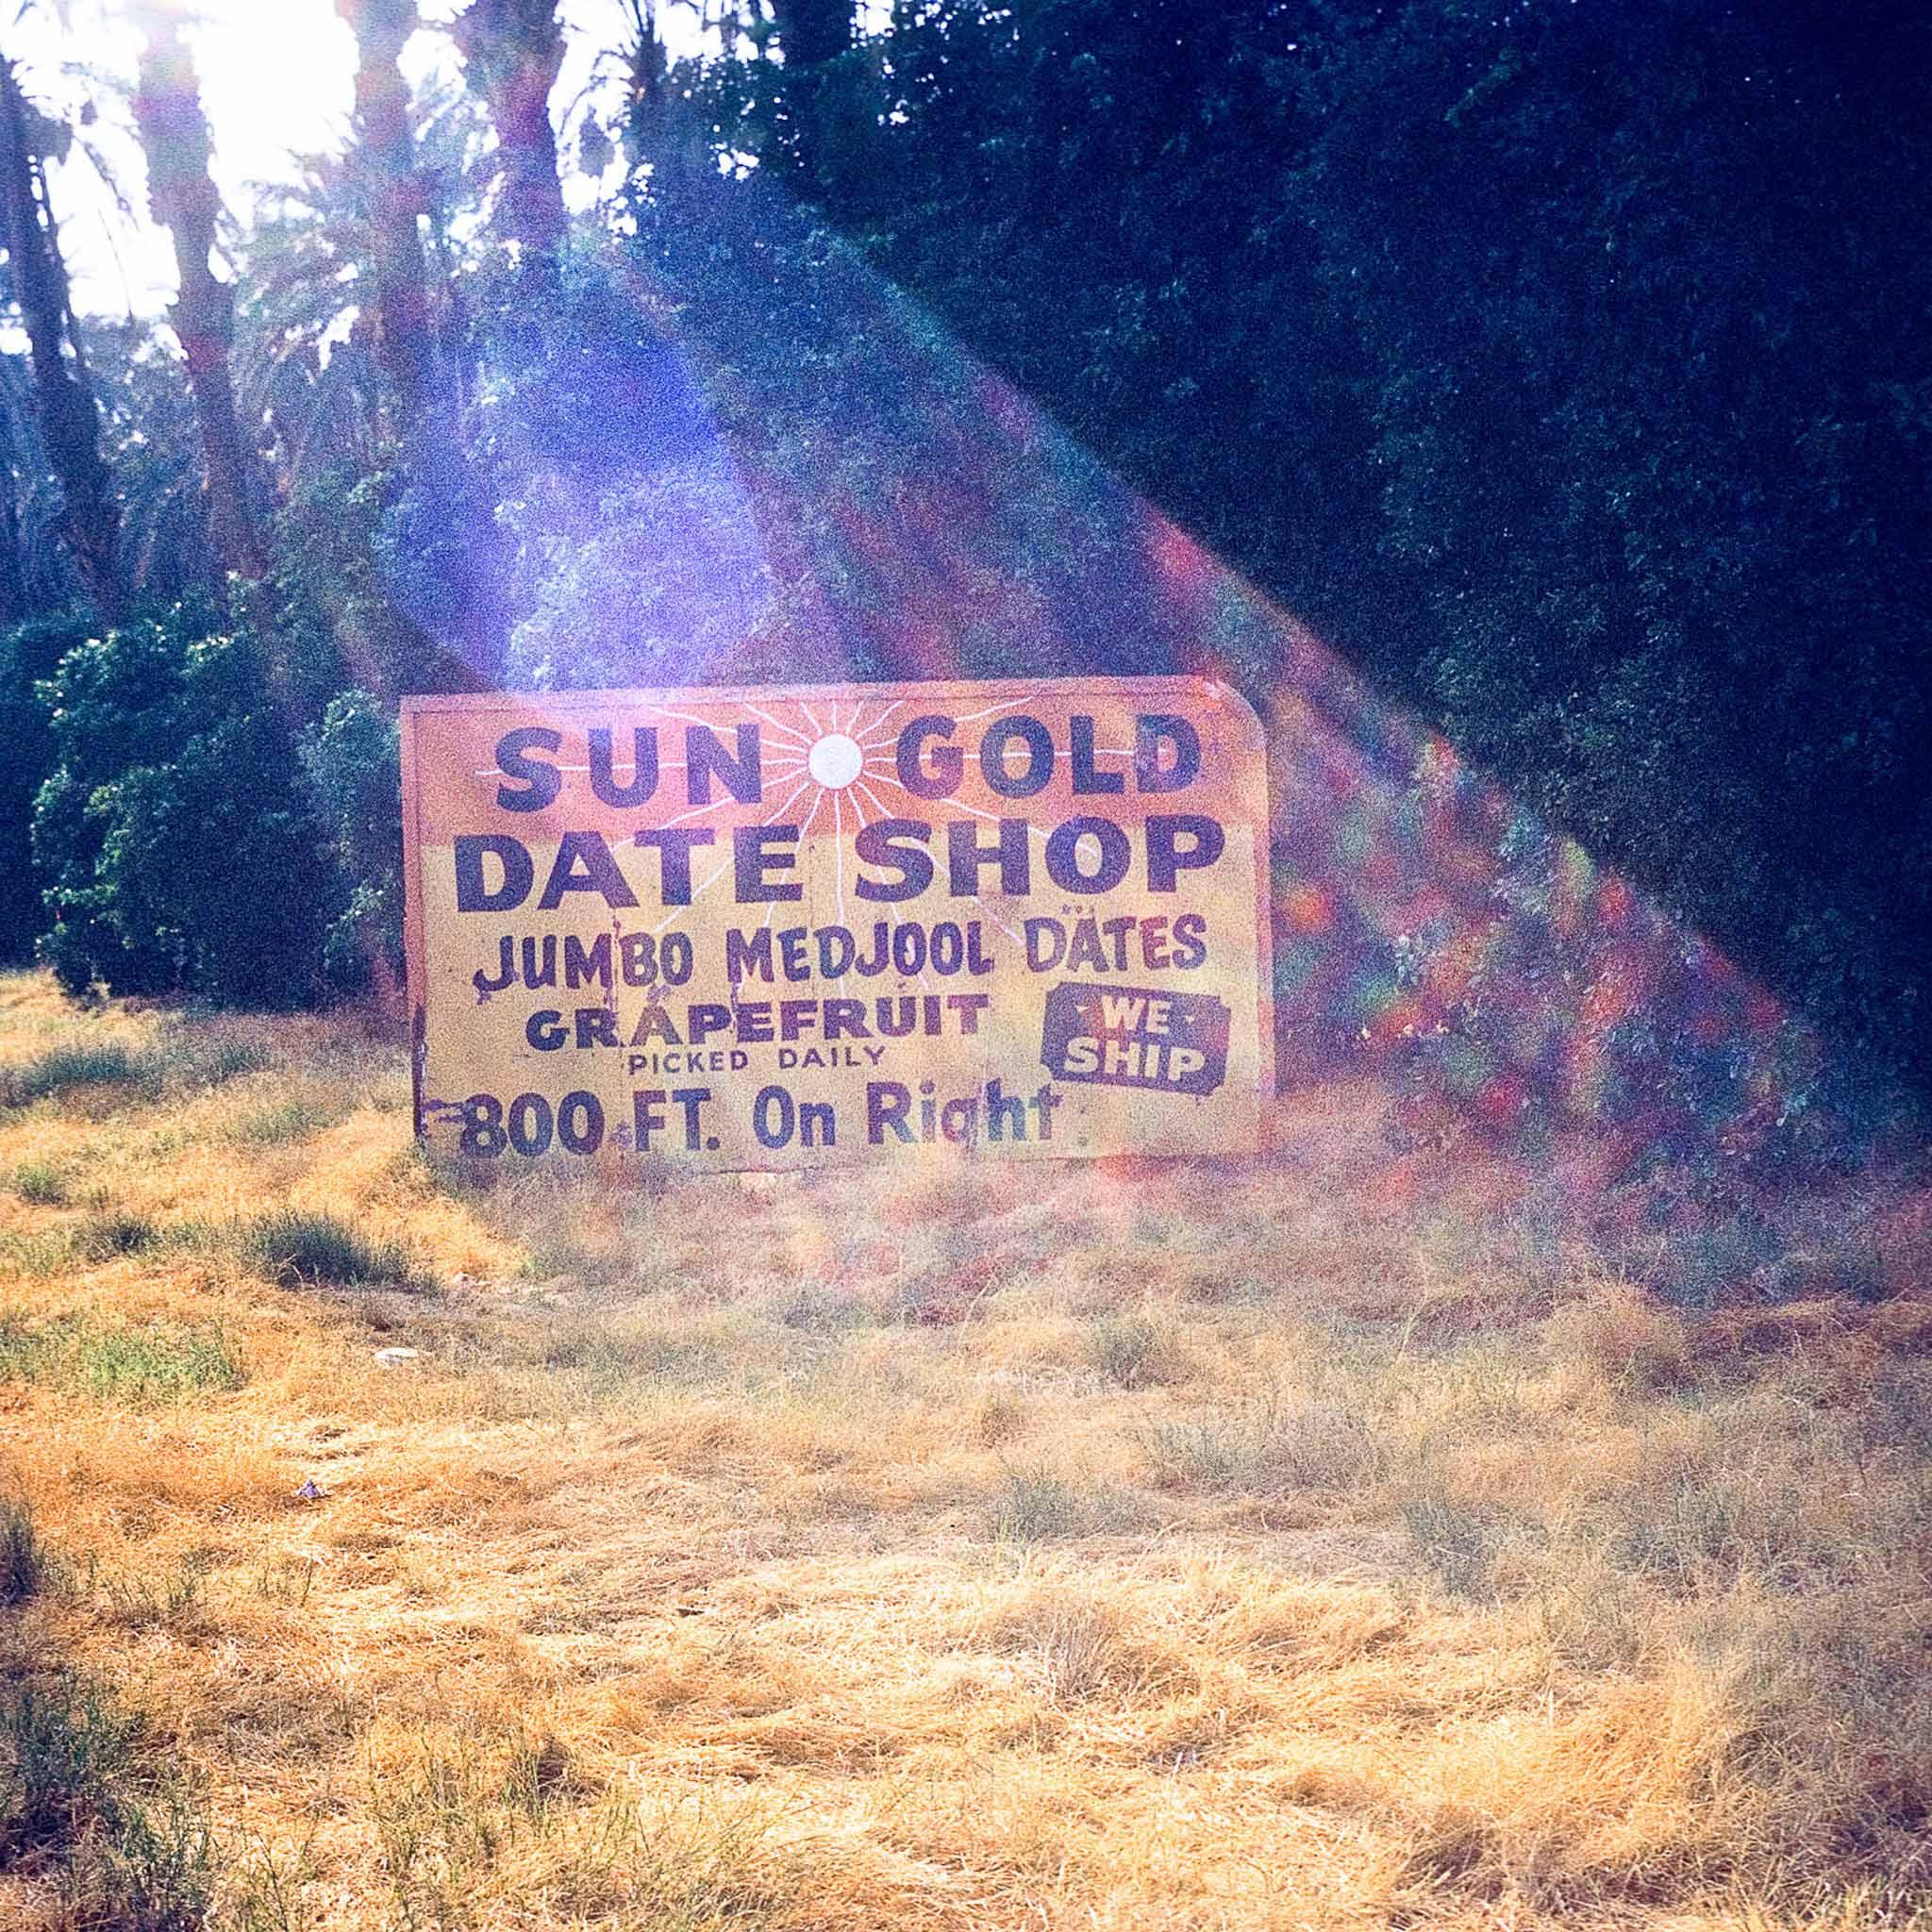 A sign in a meadow that says "sun Gold Date Shop"